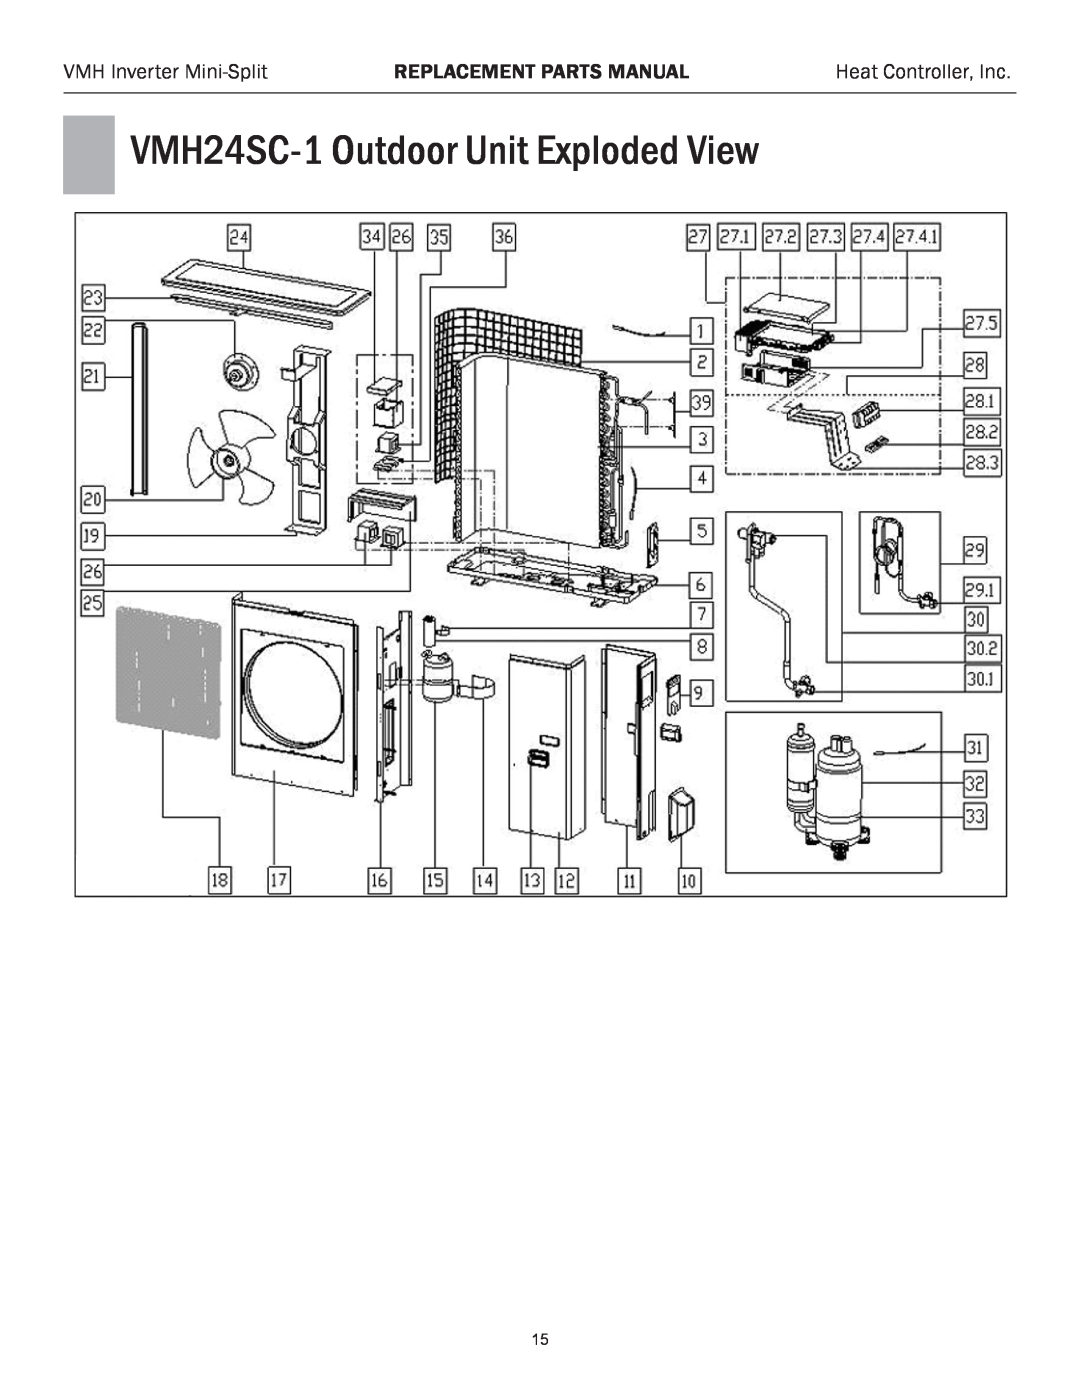 Heat Controller VMH 24 manual VMH24SC-1Outdoor Unit Exploded View, VMH Inverter Mini-Split, Replacement Parts Manual 